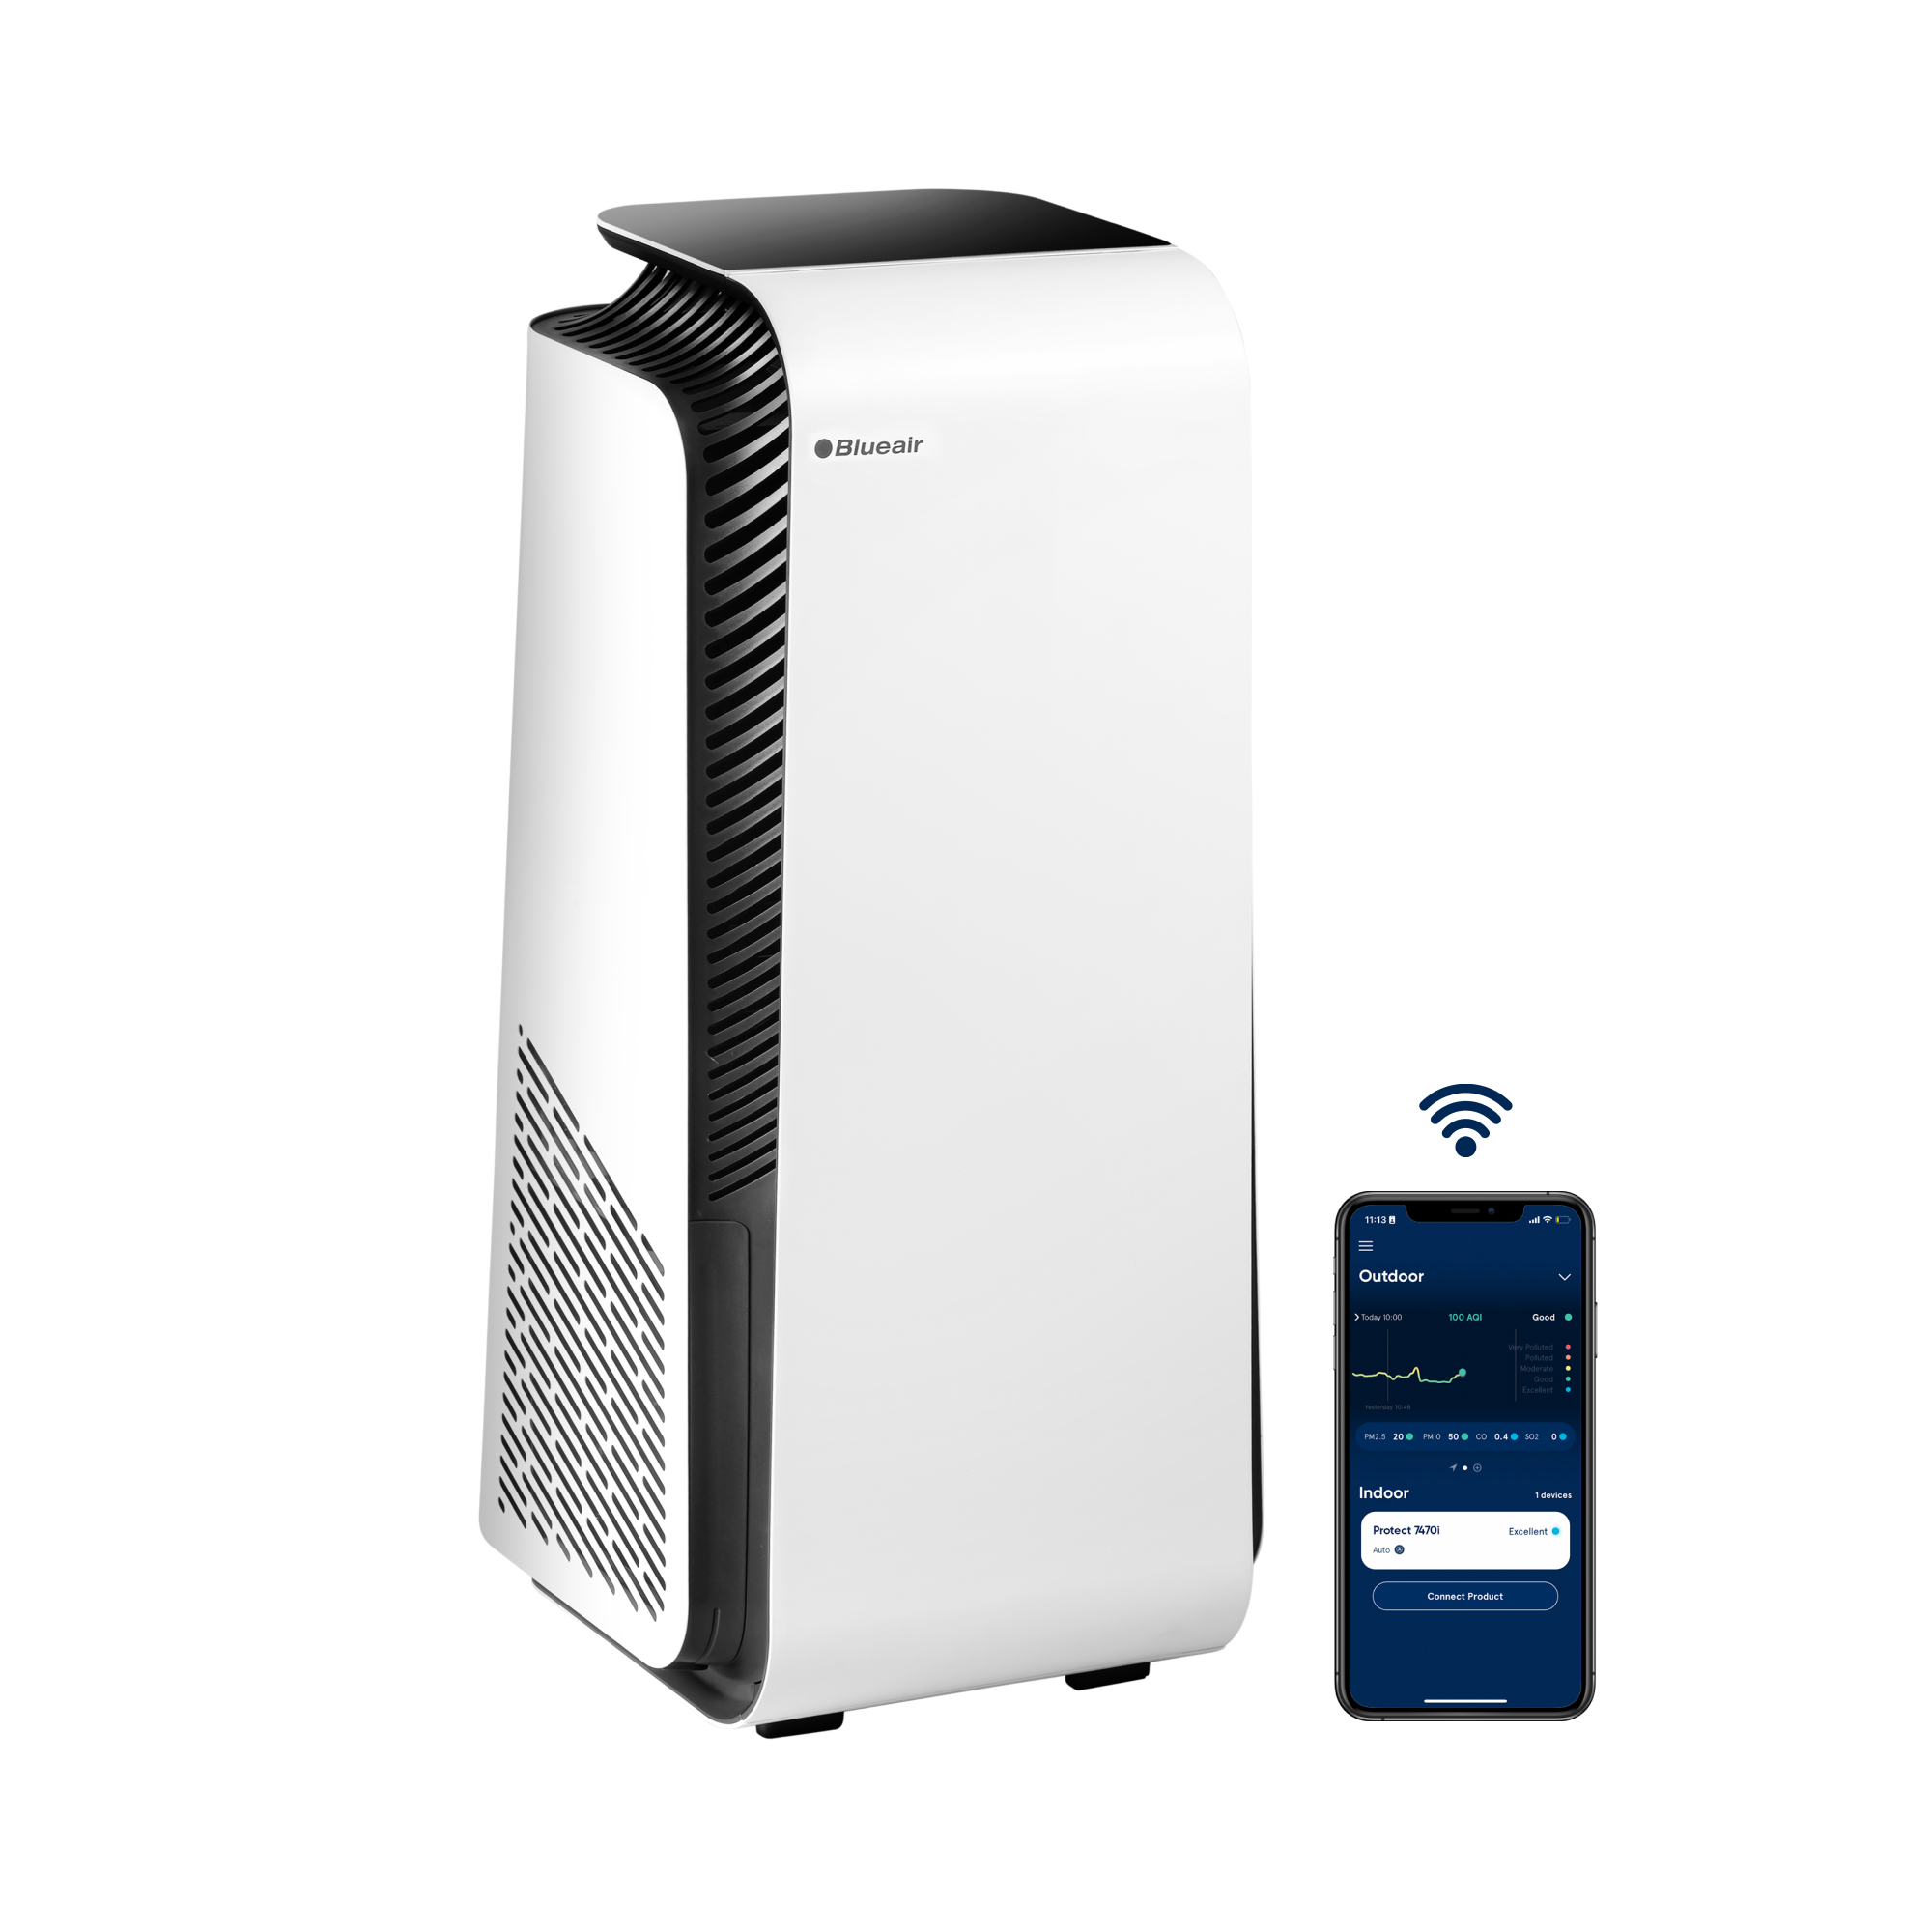 BLUEAIR Protect 7470i Smart Auto HEPASilent 22dB Air Purifier for Large Room up to 2000sqft, 24/7 Protection Against Viruses and Bacteria, Smoke Dust Pollen, Google/Alexa Voice App Control, LCD, White - image 1 of 13